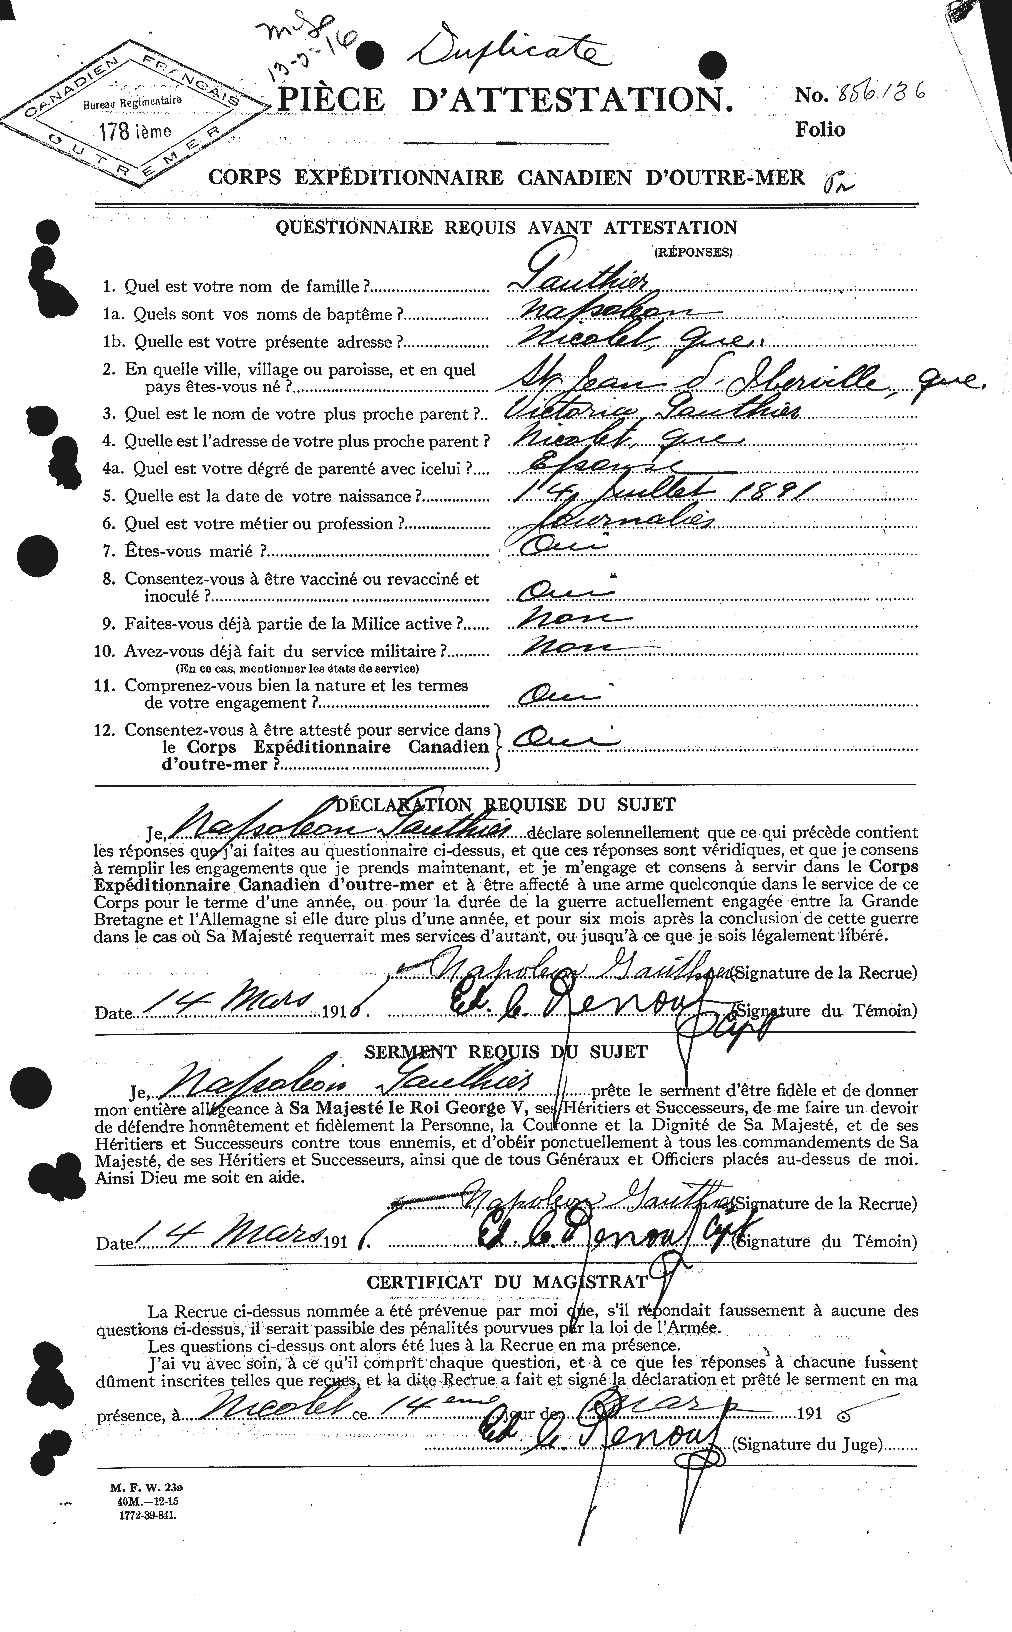 Personnel Records of the First World War - CEF 342948a